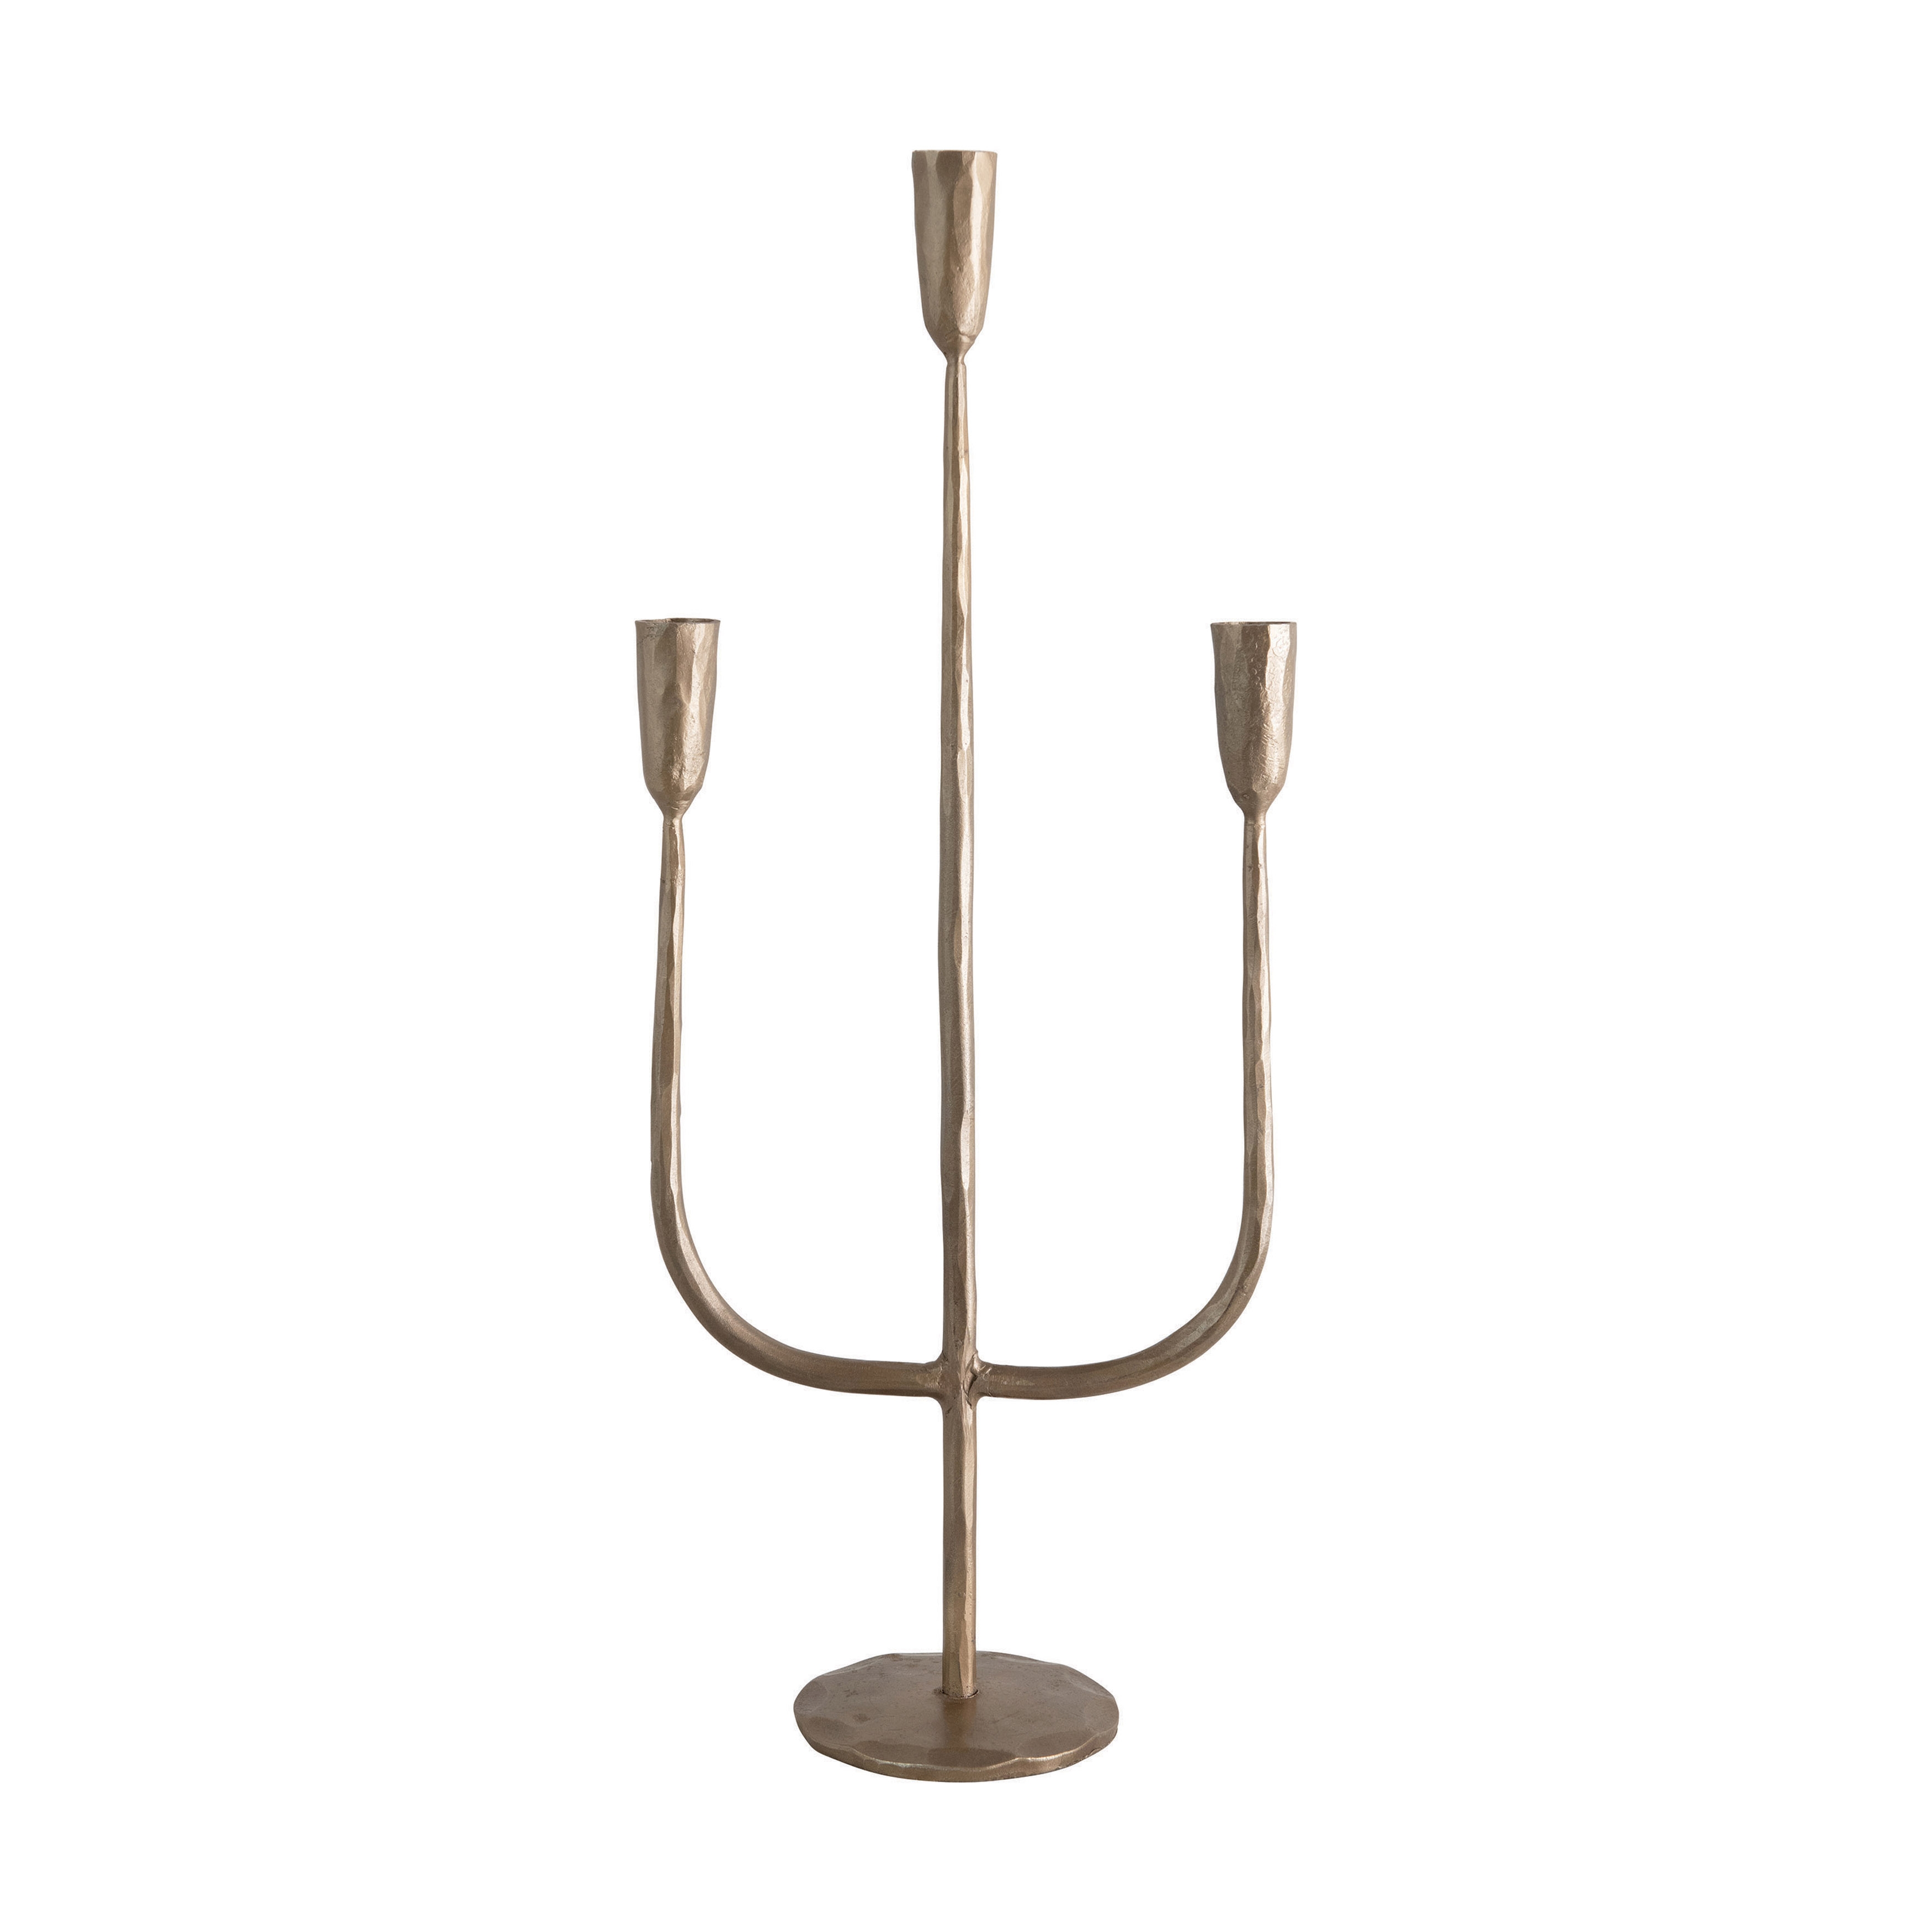 Hand-Forged Metal Candelabra, Antique Brass Finish (Holds 3 Taper Candles) - Image 0